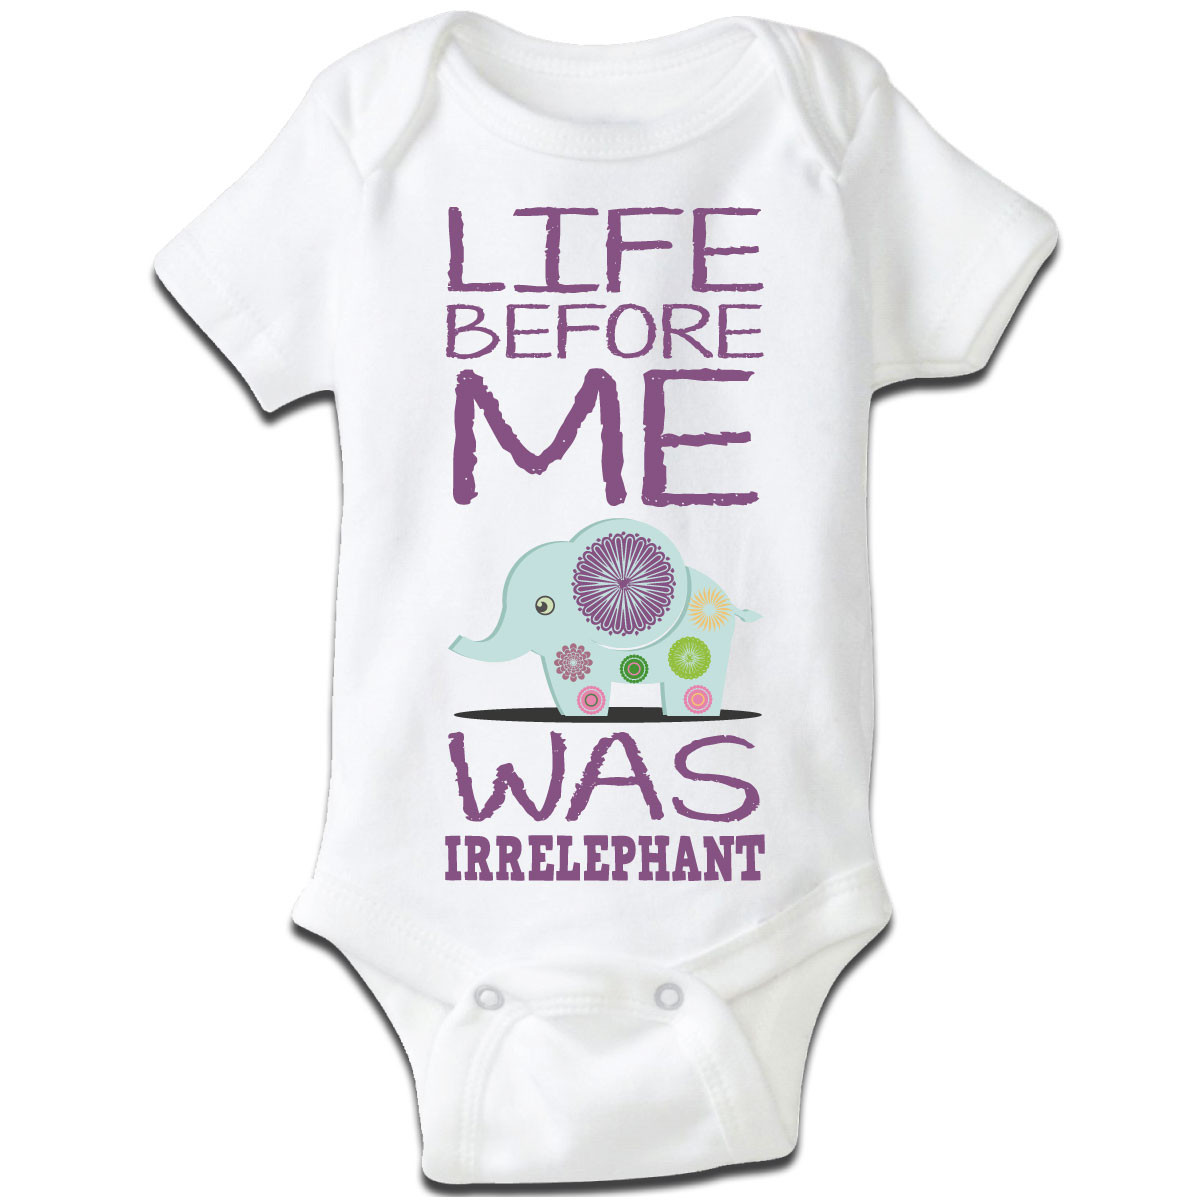 "Life Before Me Was Irrelephant" Baby Grow